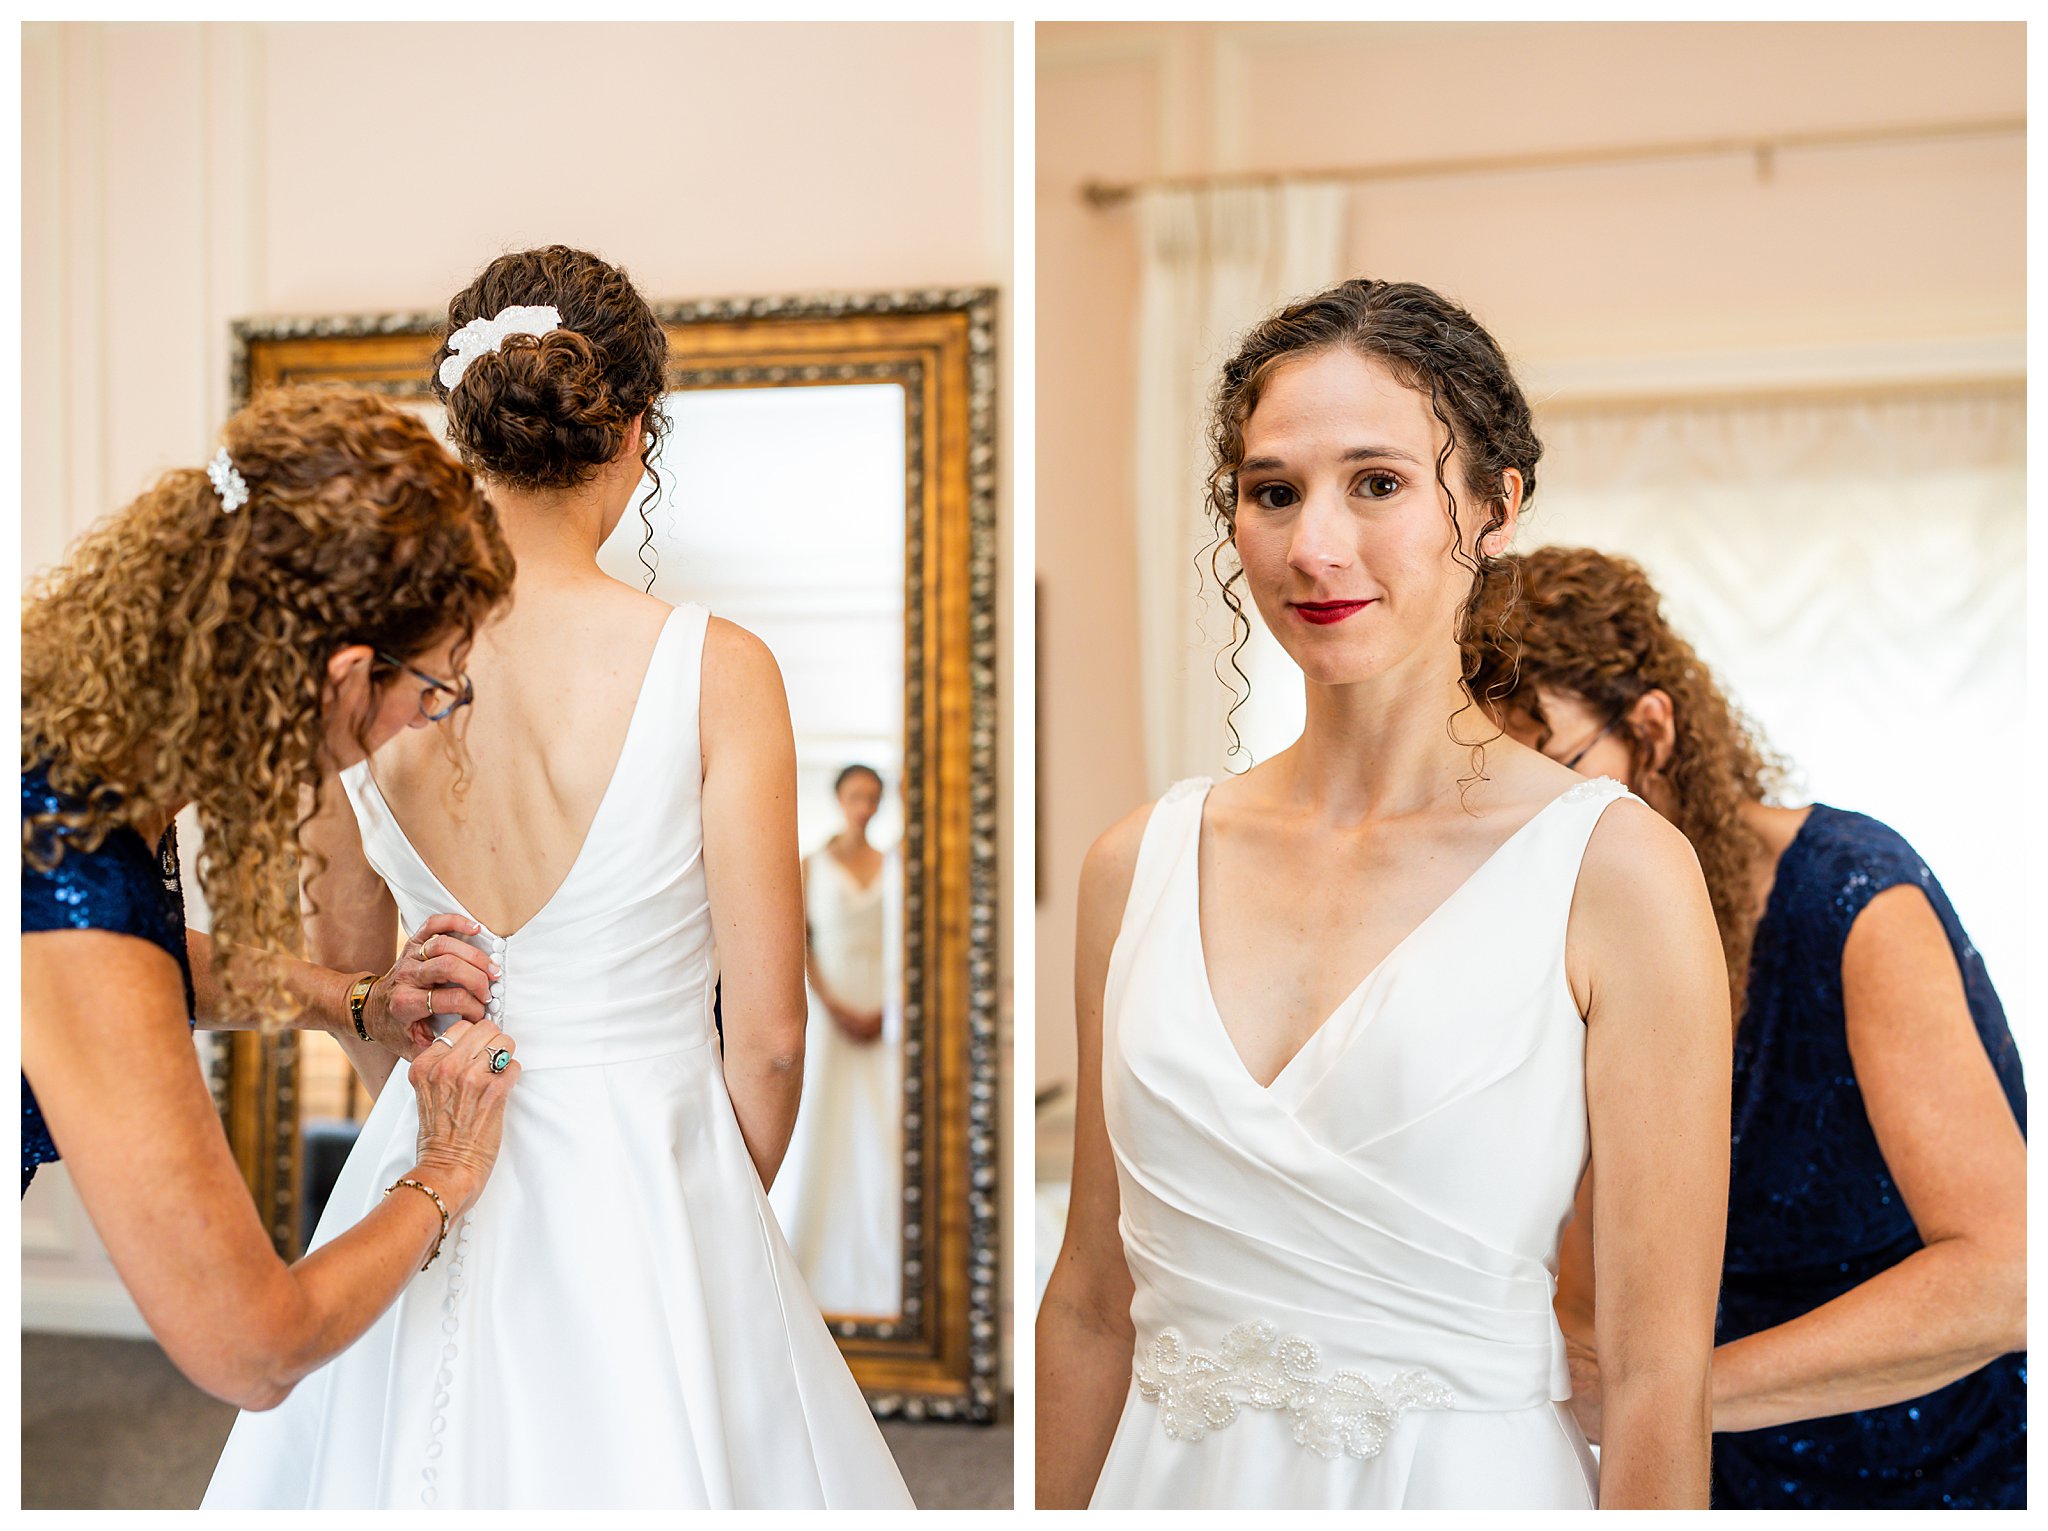 A bride gets ready for her mansion wedding